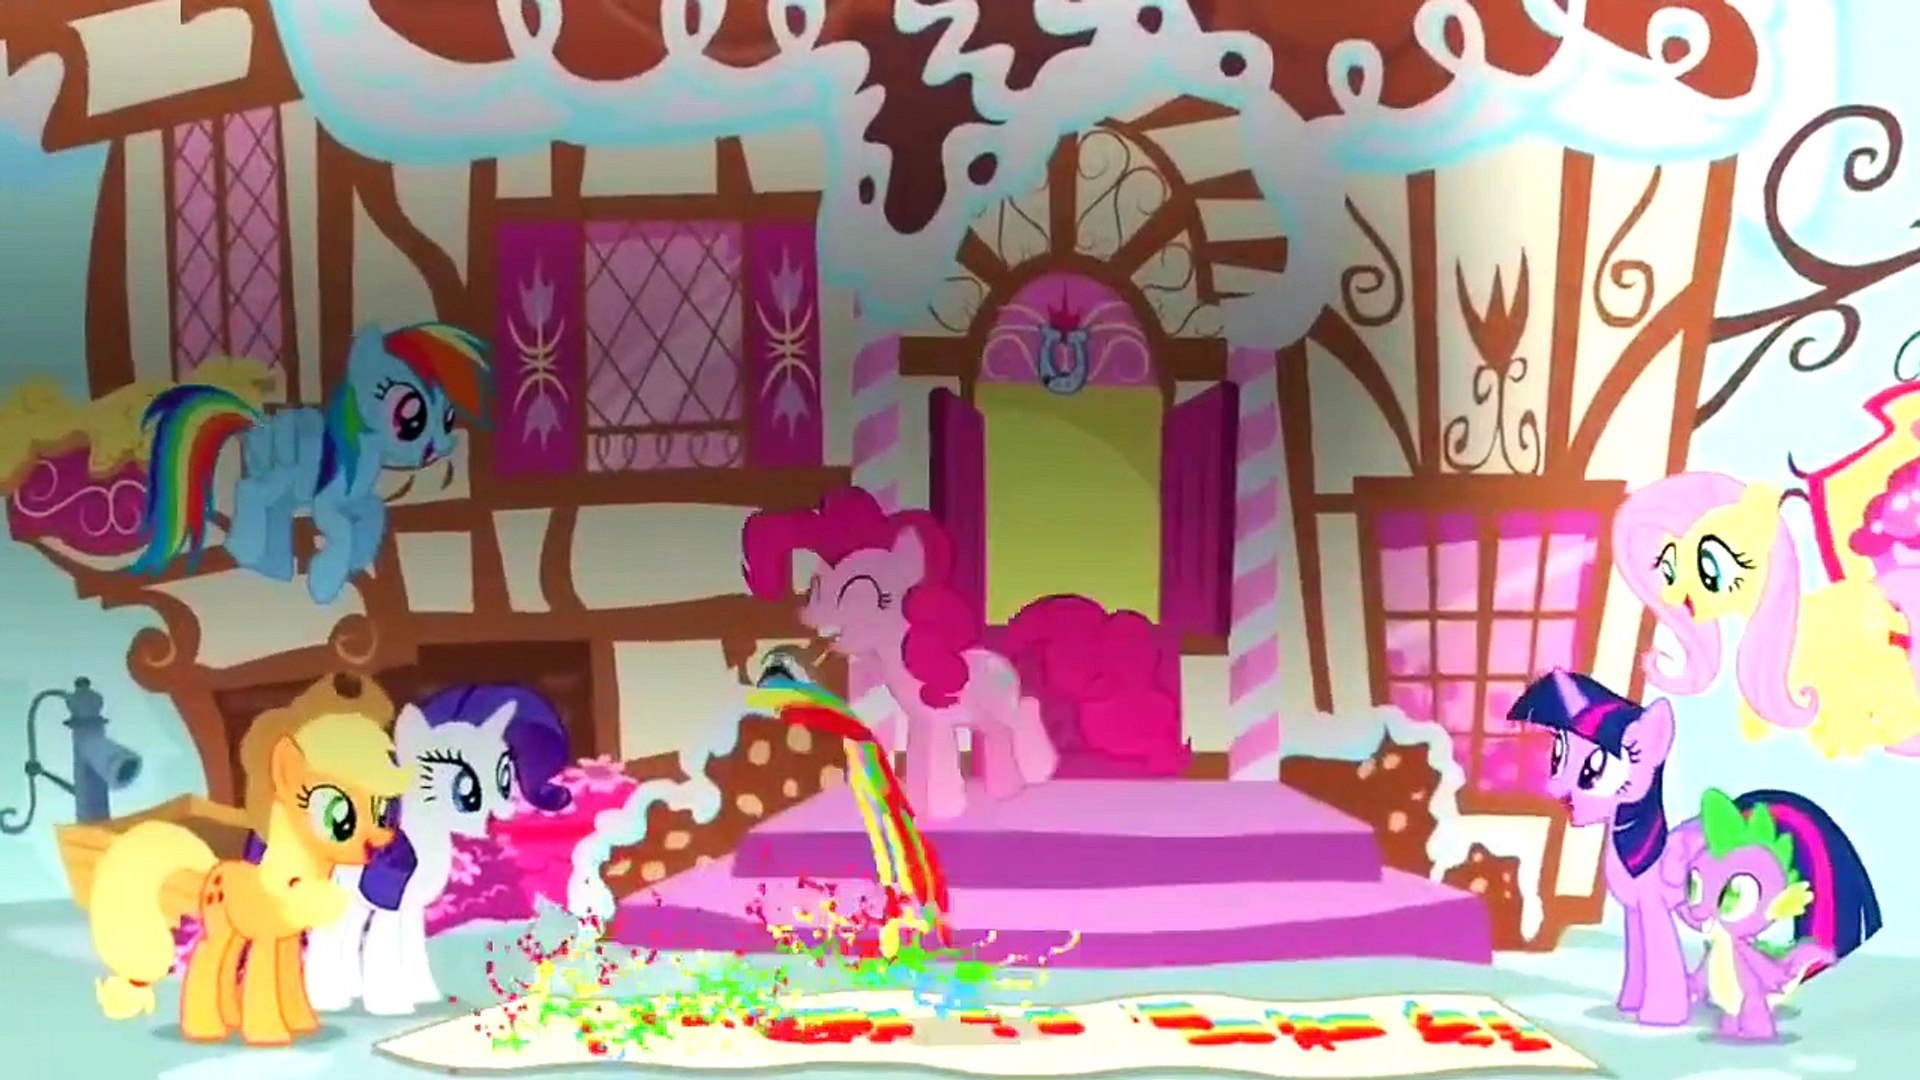 Pinkie Pie Crying in G Major 4.mp4 - video Dailymotion